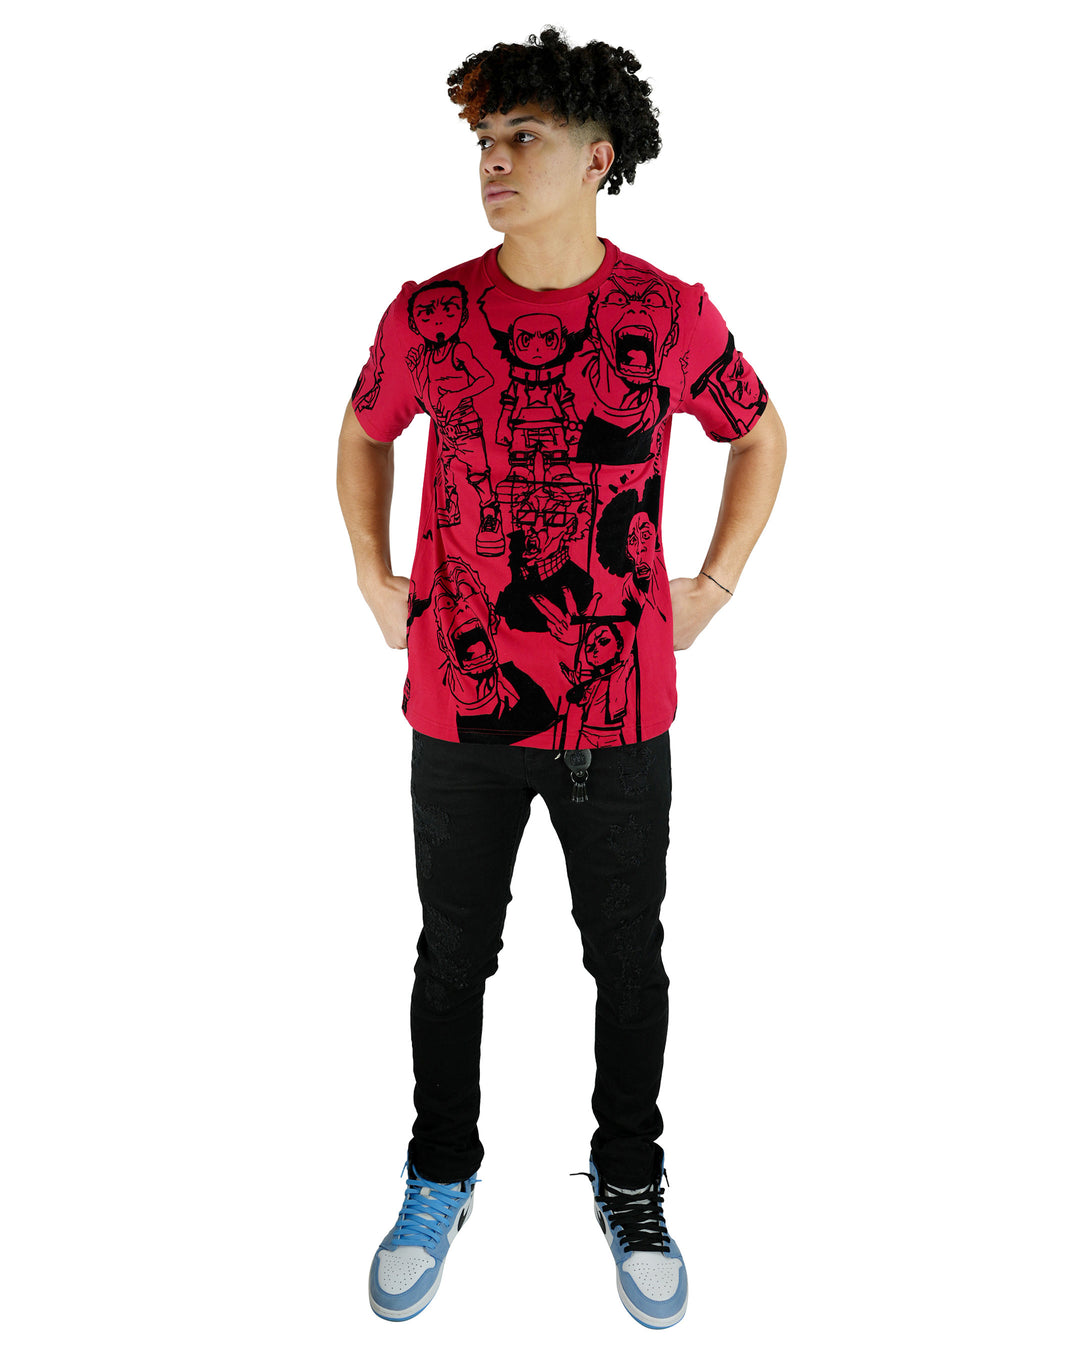 The Boondocks - Family Red T-Shirt